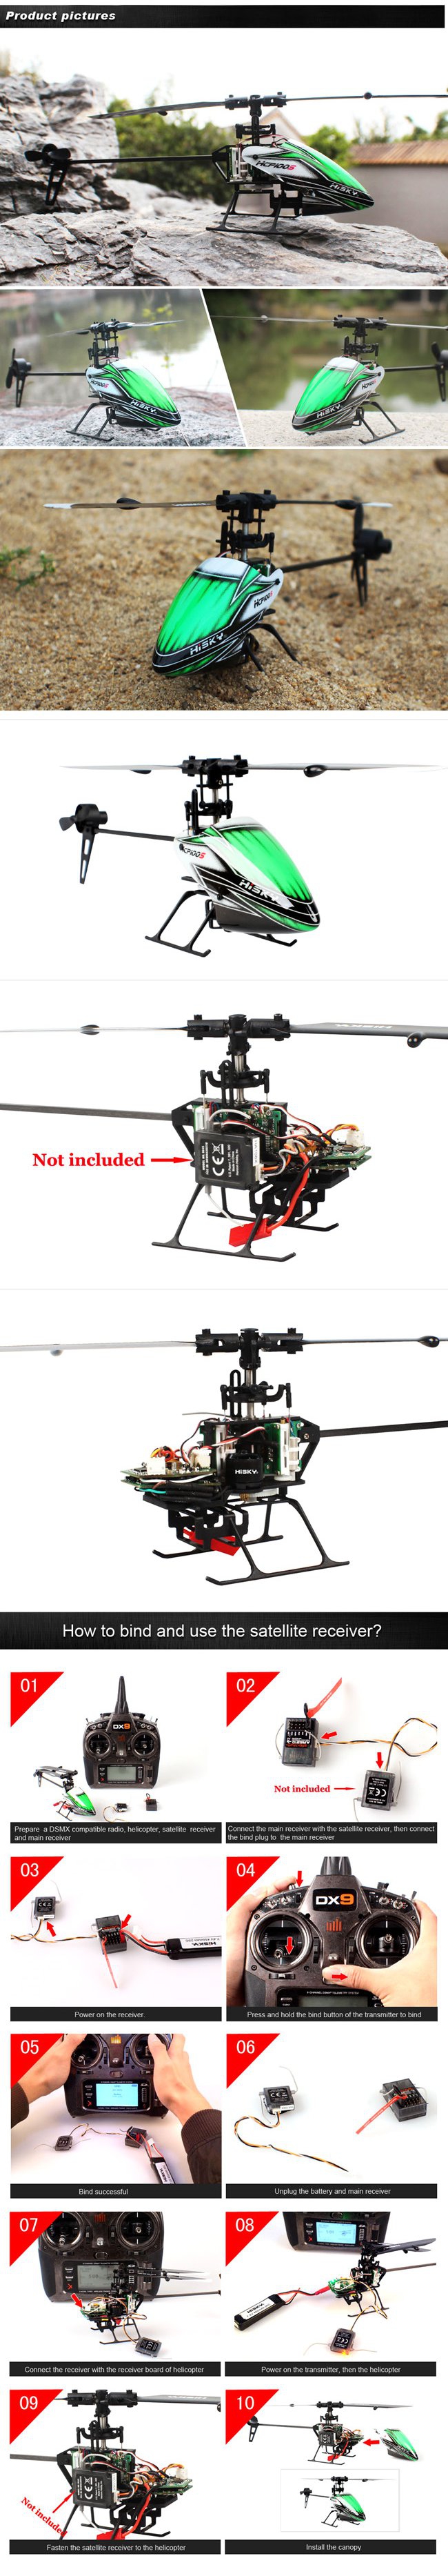 Hisky HCP100S 6CH Dual Brushless RC Helicopter With H-6 Transmitter